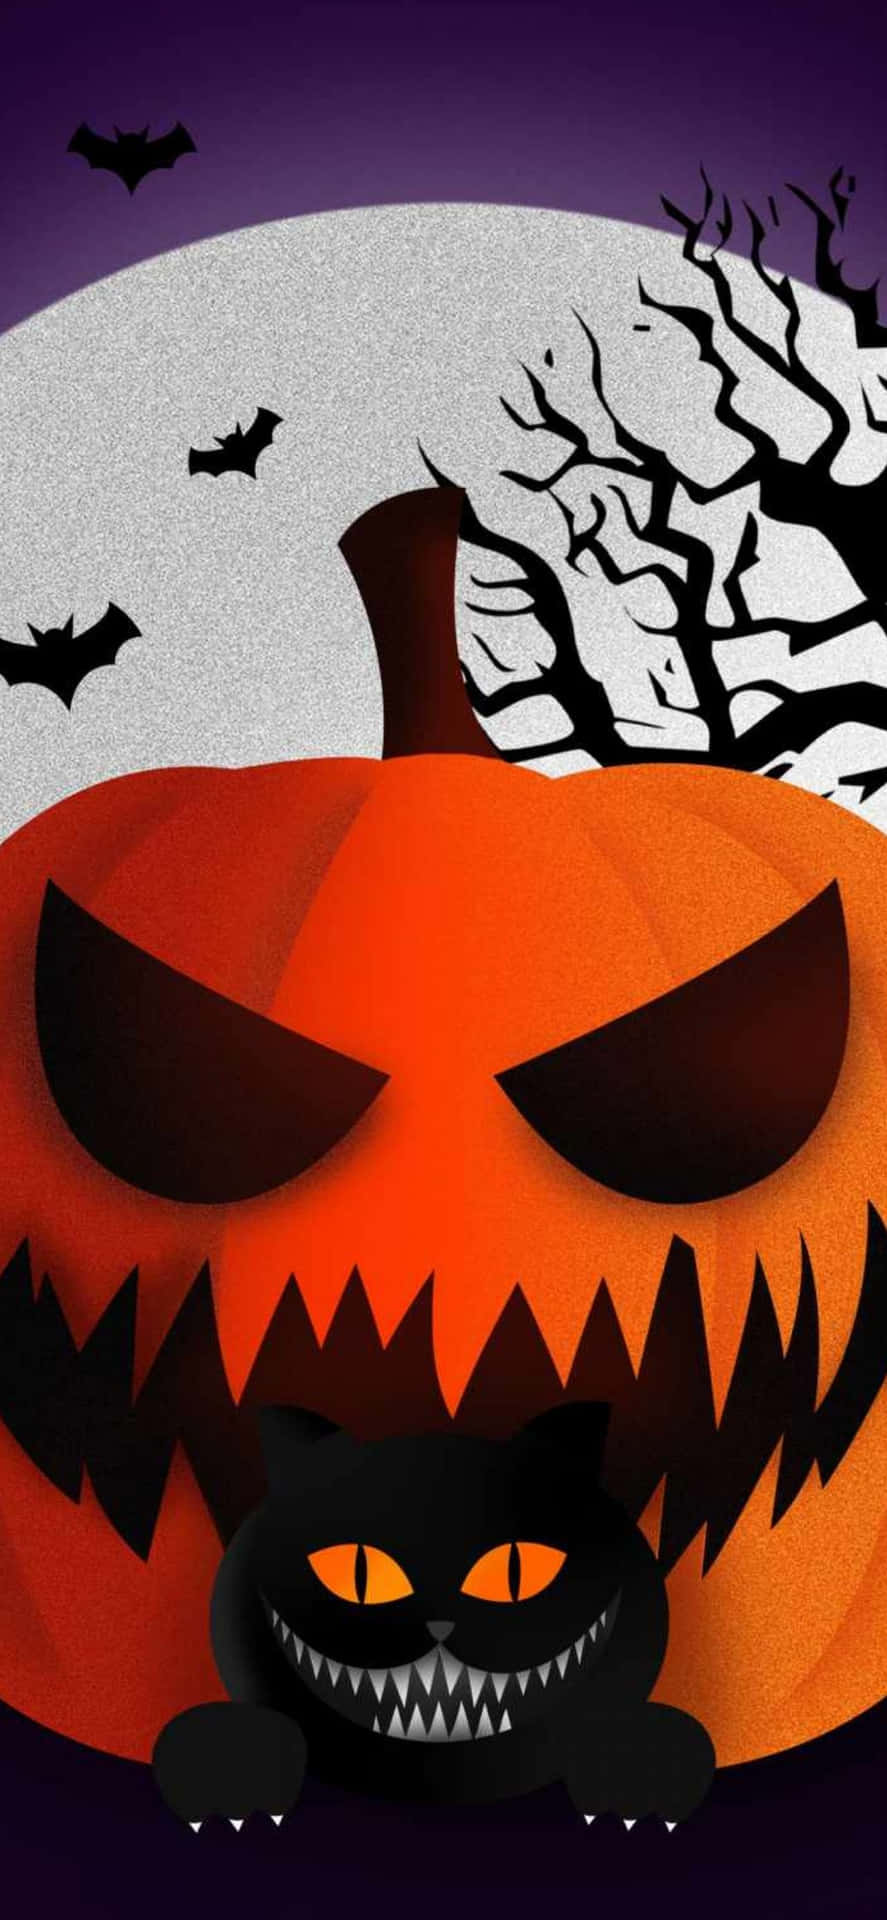 Enjoy the spooky wonders of Halloween with this creepy iPhone wallpaper!